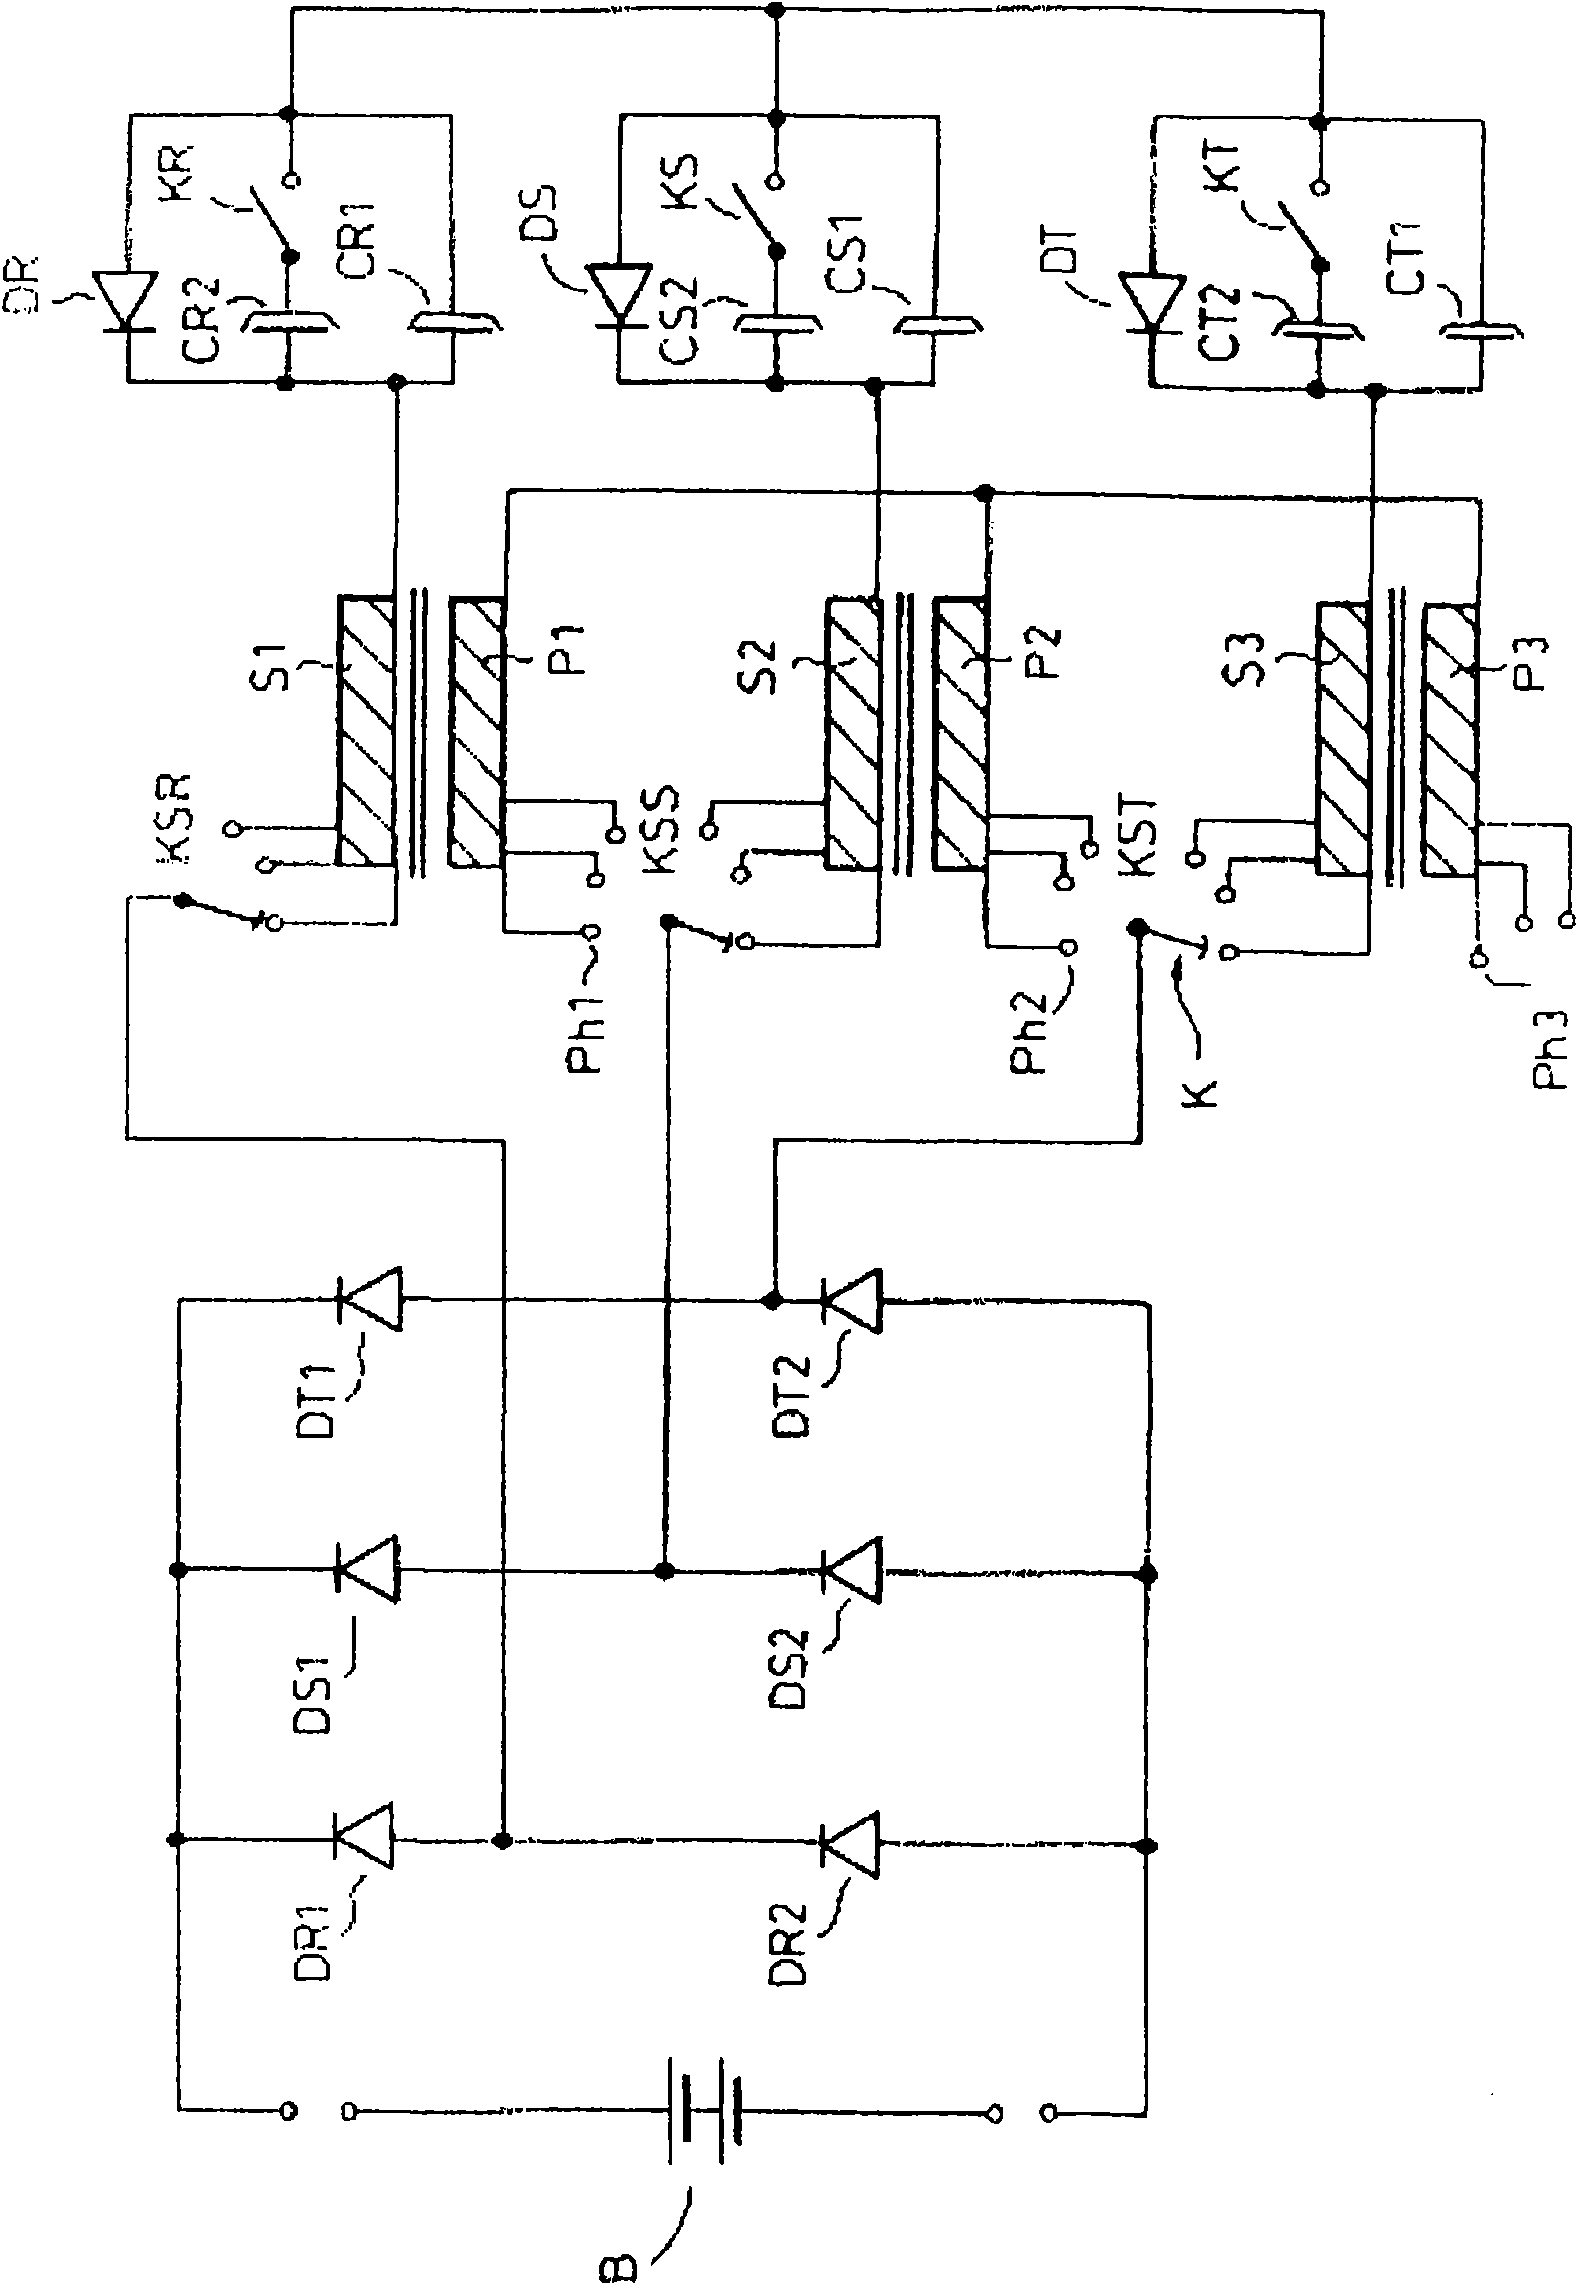 Battery charger circuit operated from a three-phase network